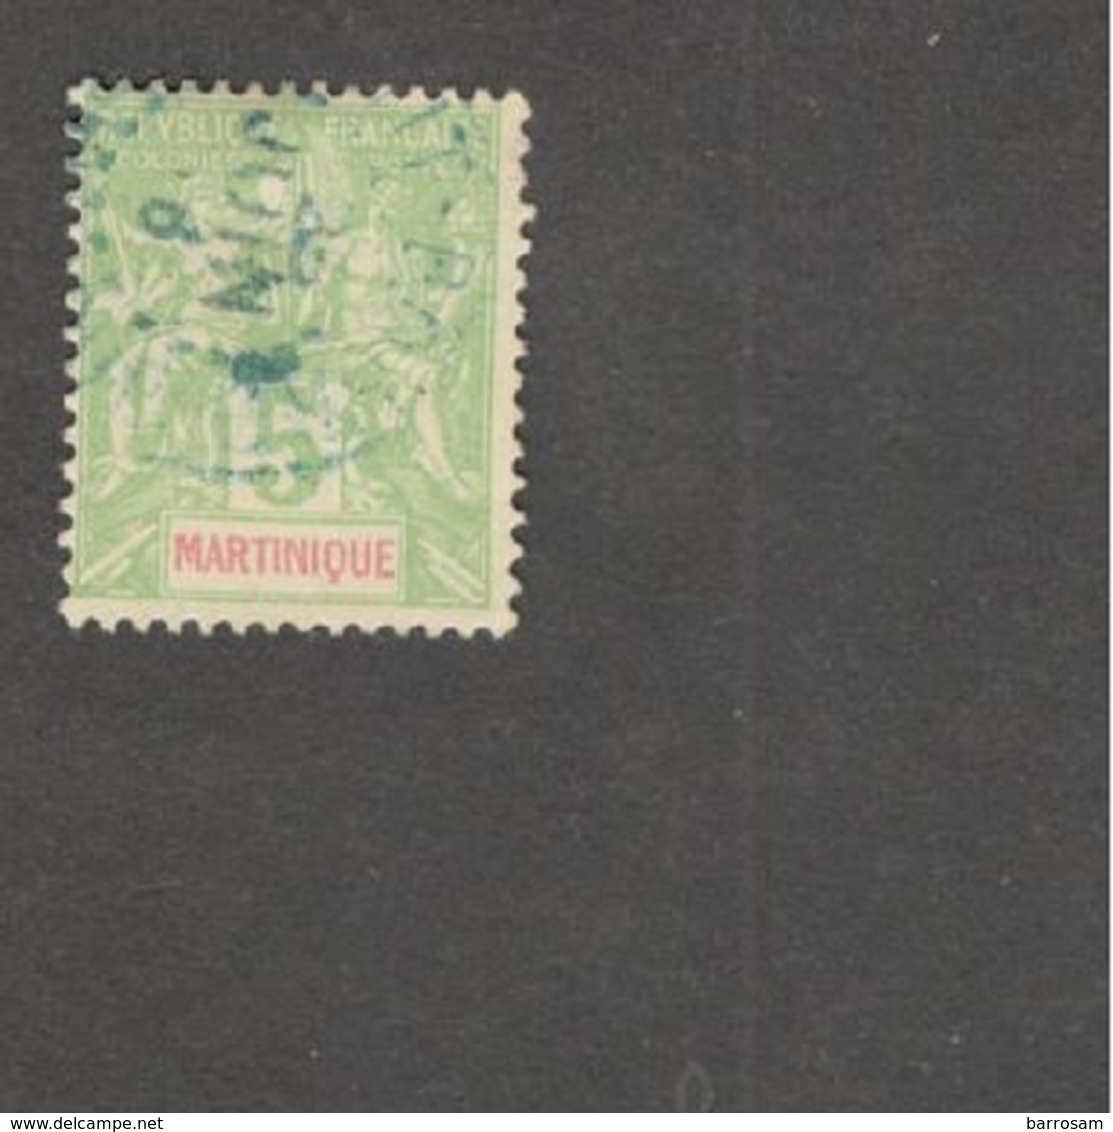 MARTINIQUE.....1899:Yvert44 Used - Used Stamps